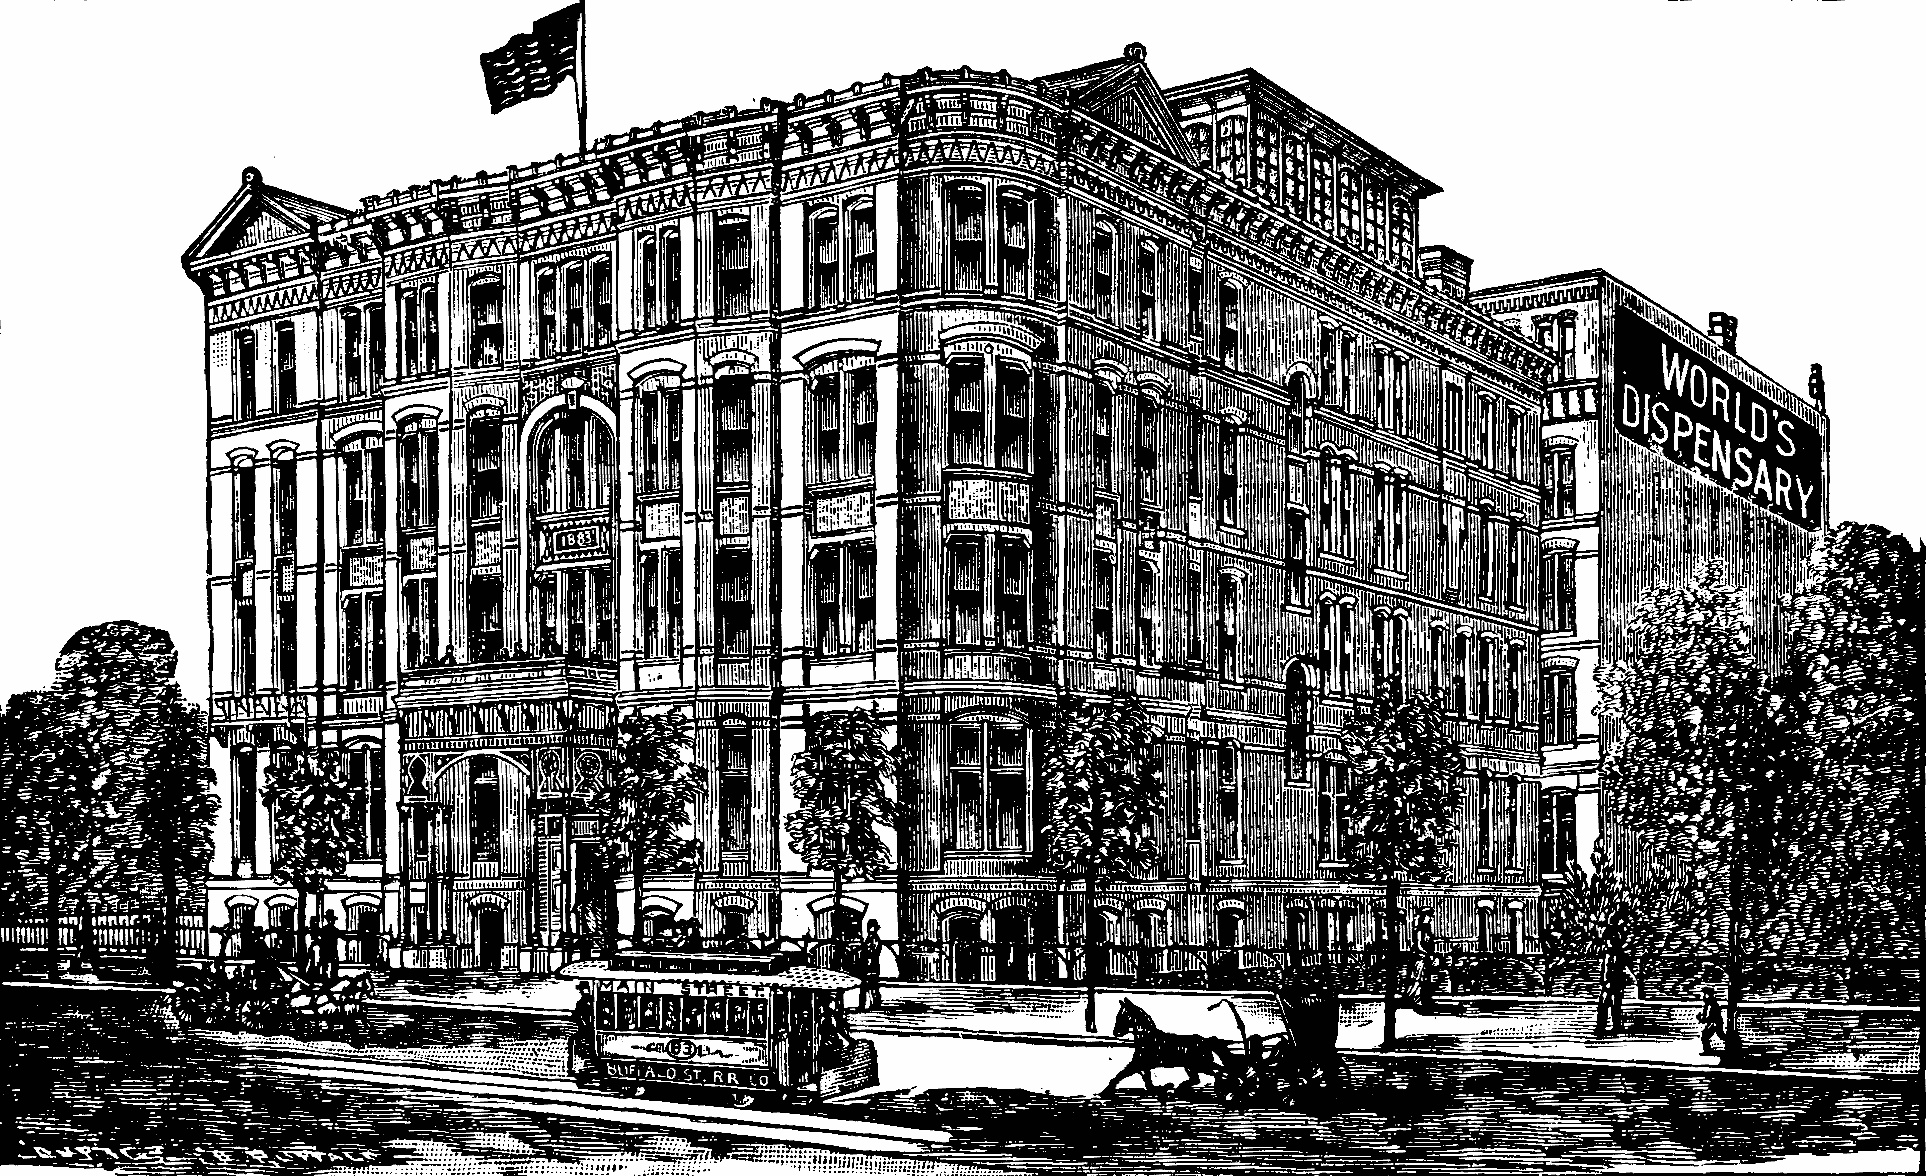 Illustration:
Invalids' Hotel and Surgical Institute, 663 Main Street, Buffalo, N.Y.